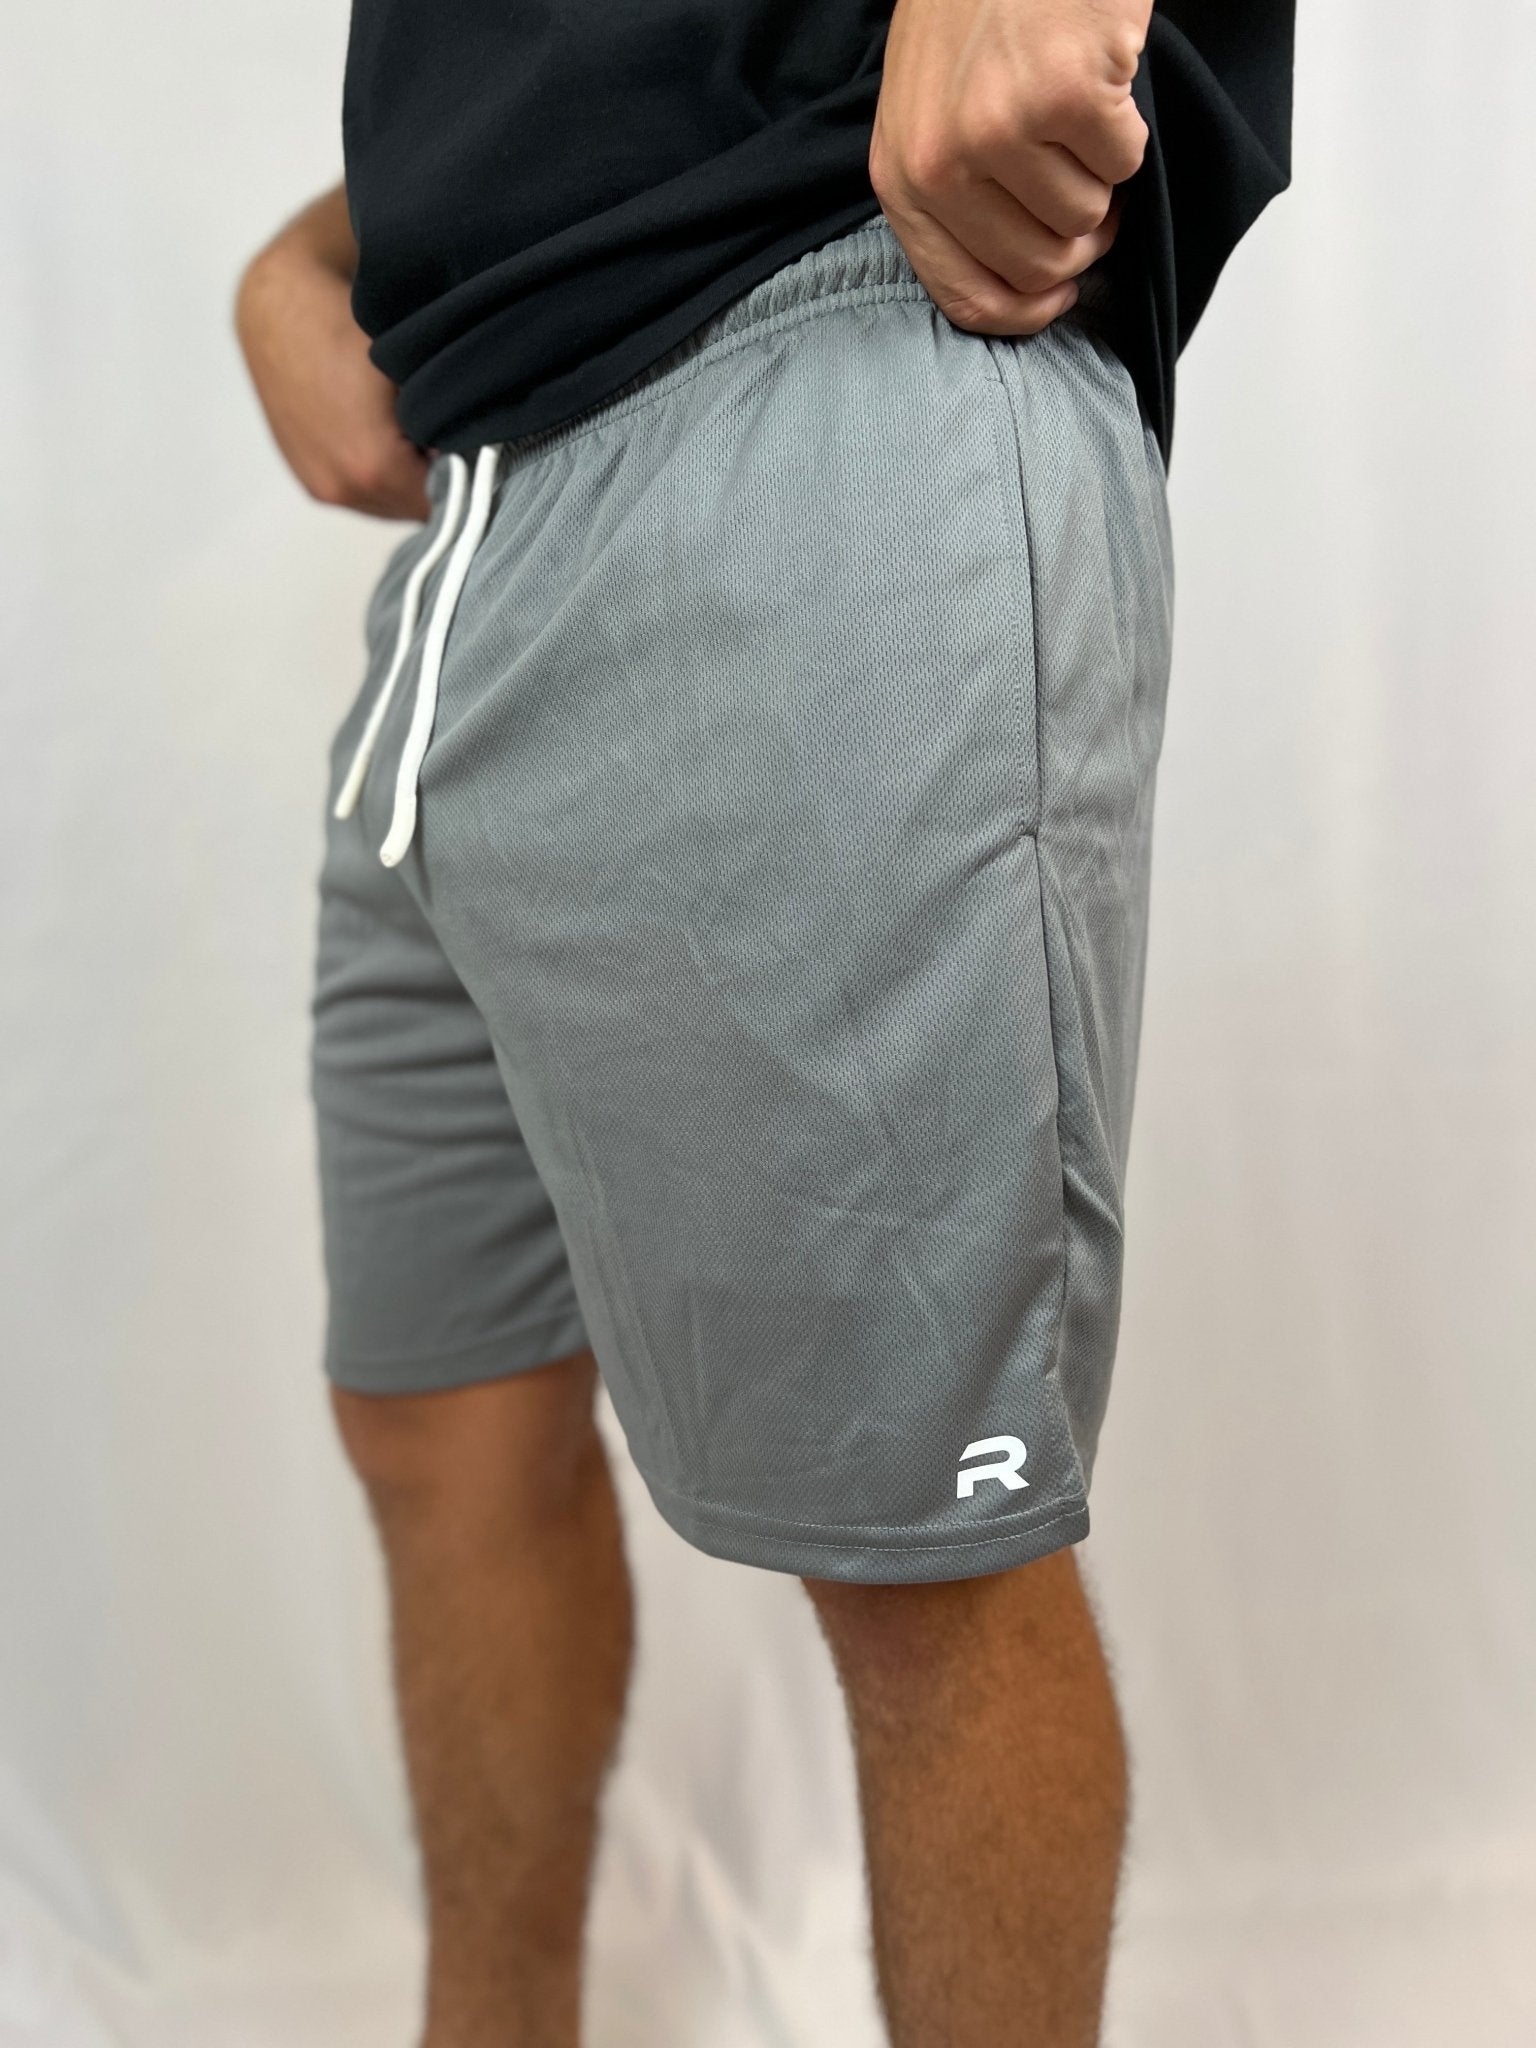 CoolStride Shorts - Resilient Active